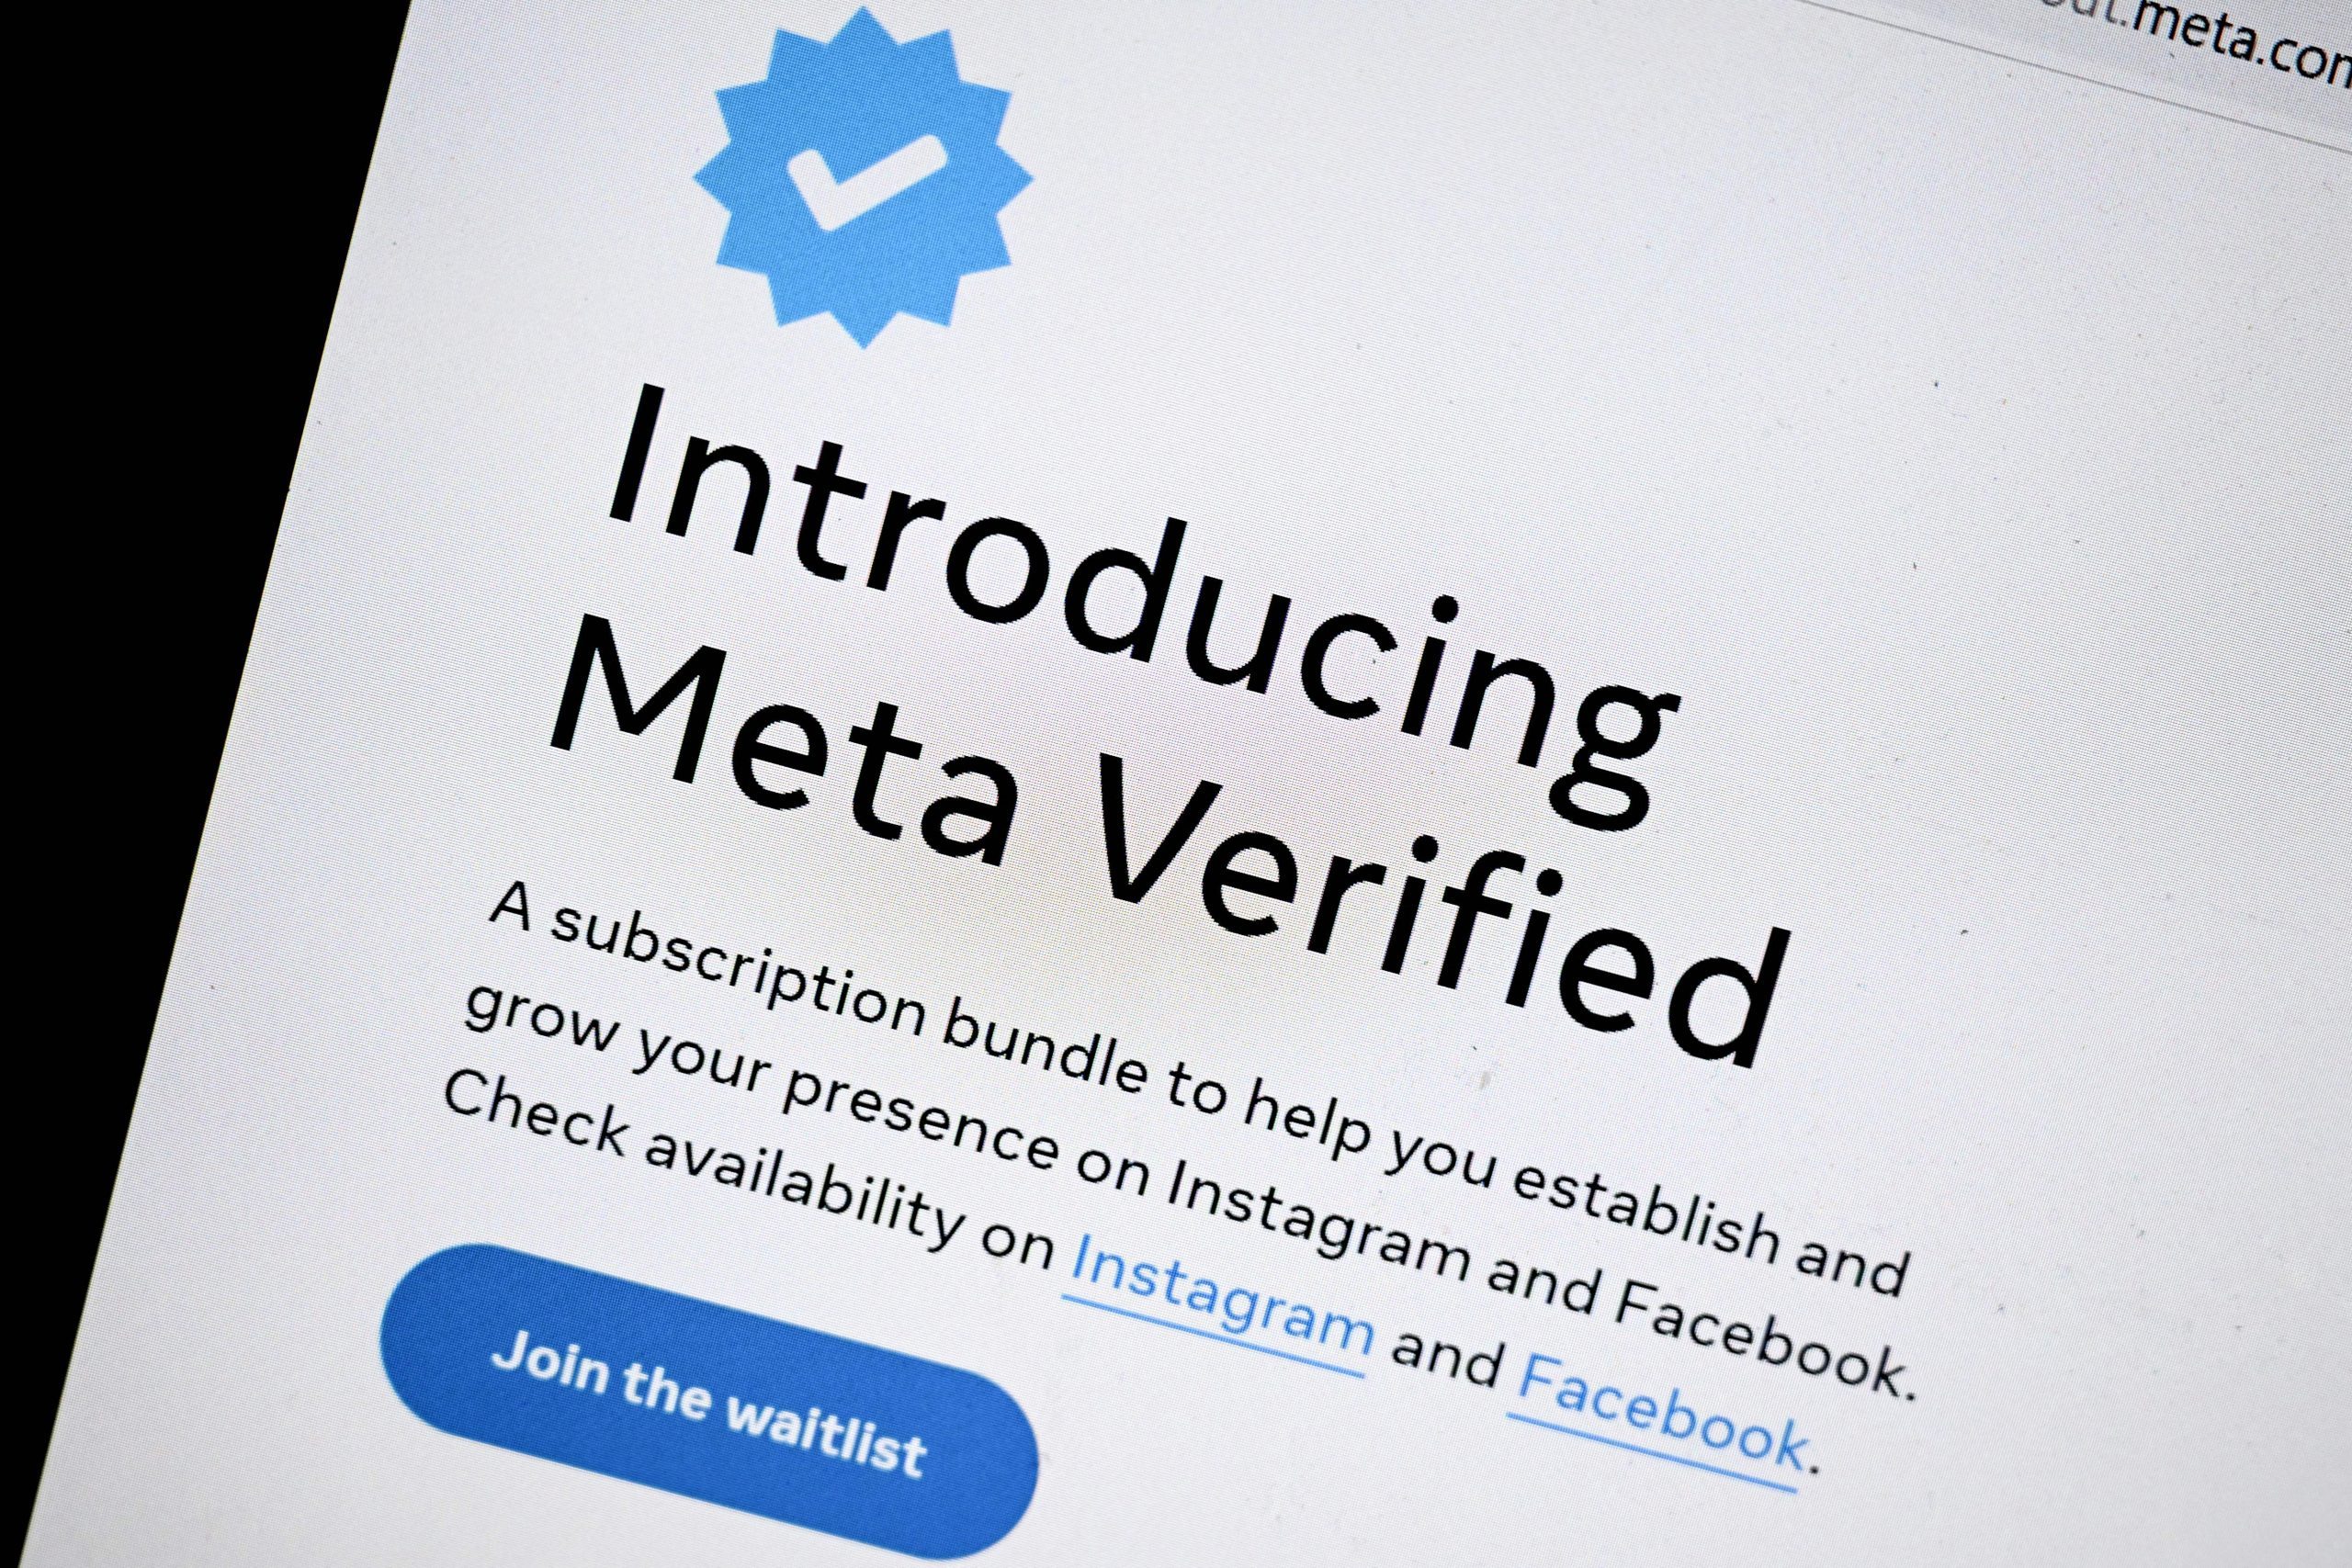 Scammers Use Verified Accounts on Facebook and Instagram to Dupe Users -  Social Stand